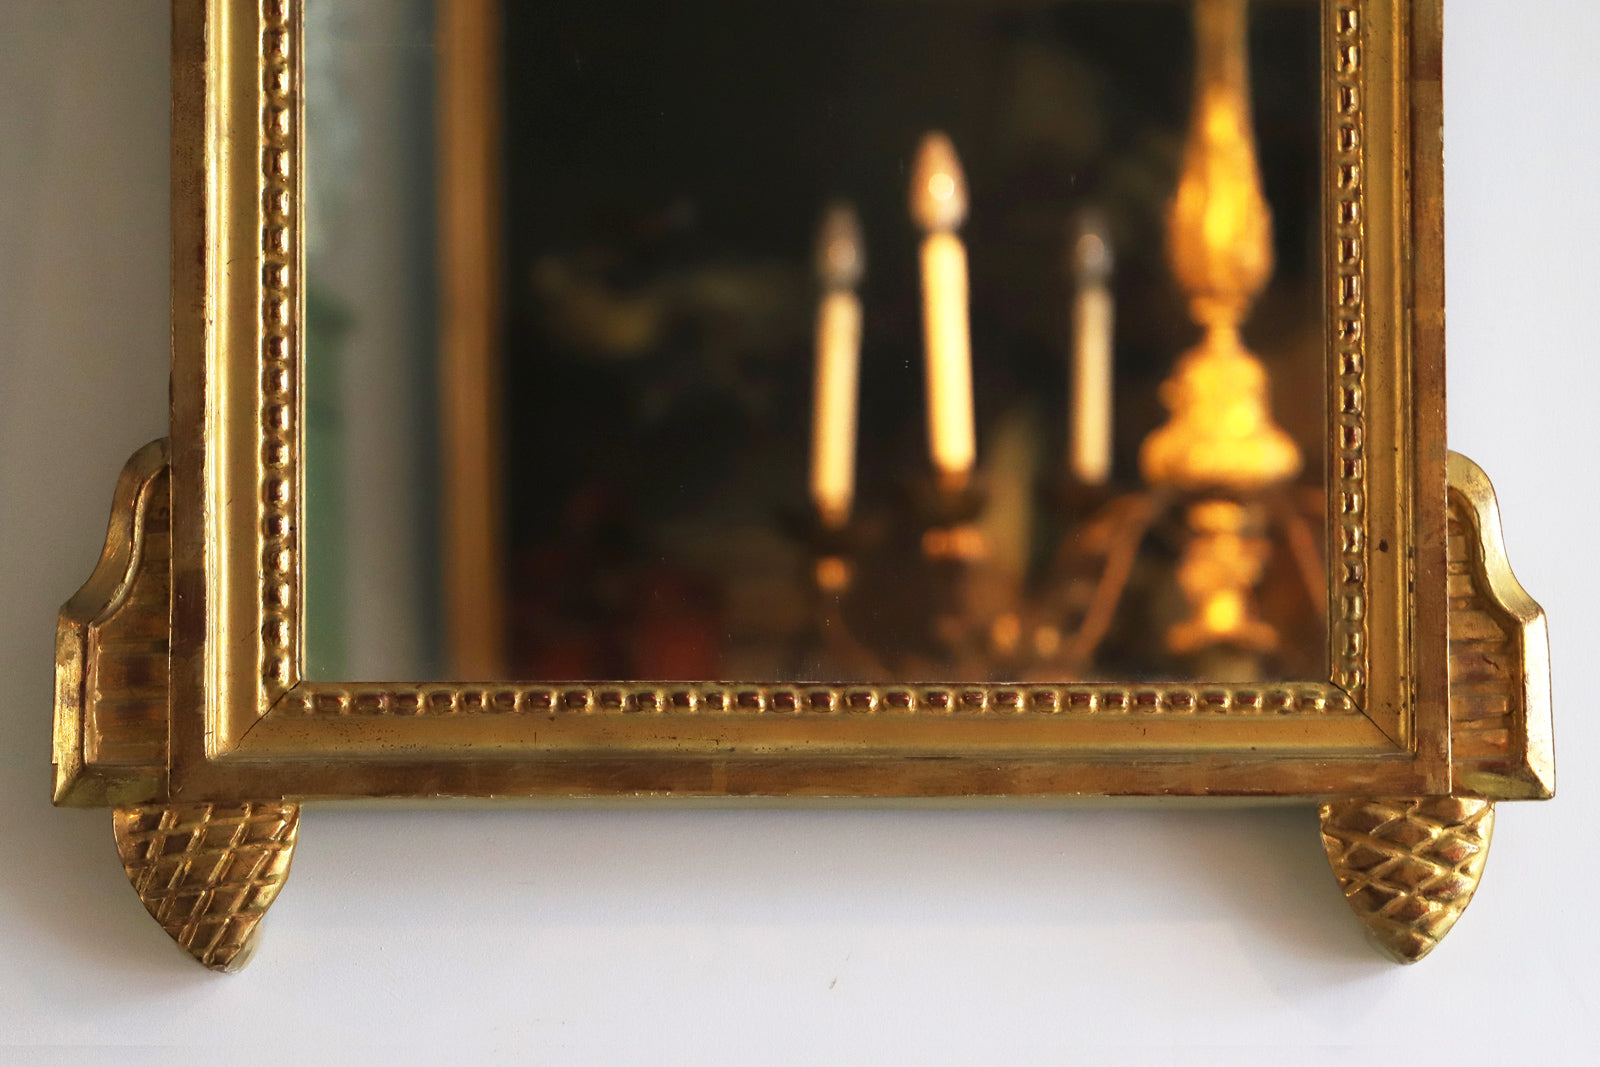 Small French Louis XVI Marriage Mirror with a Mirror Crest